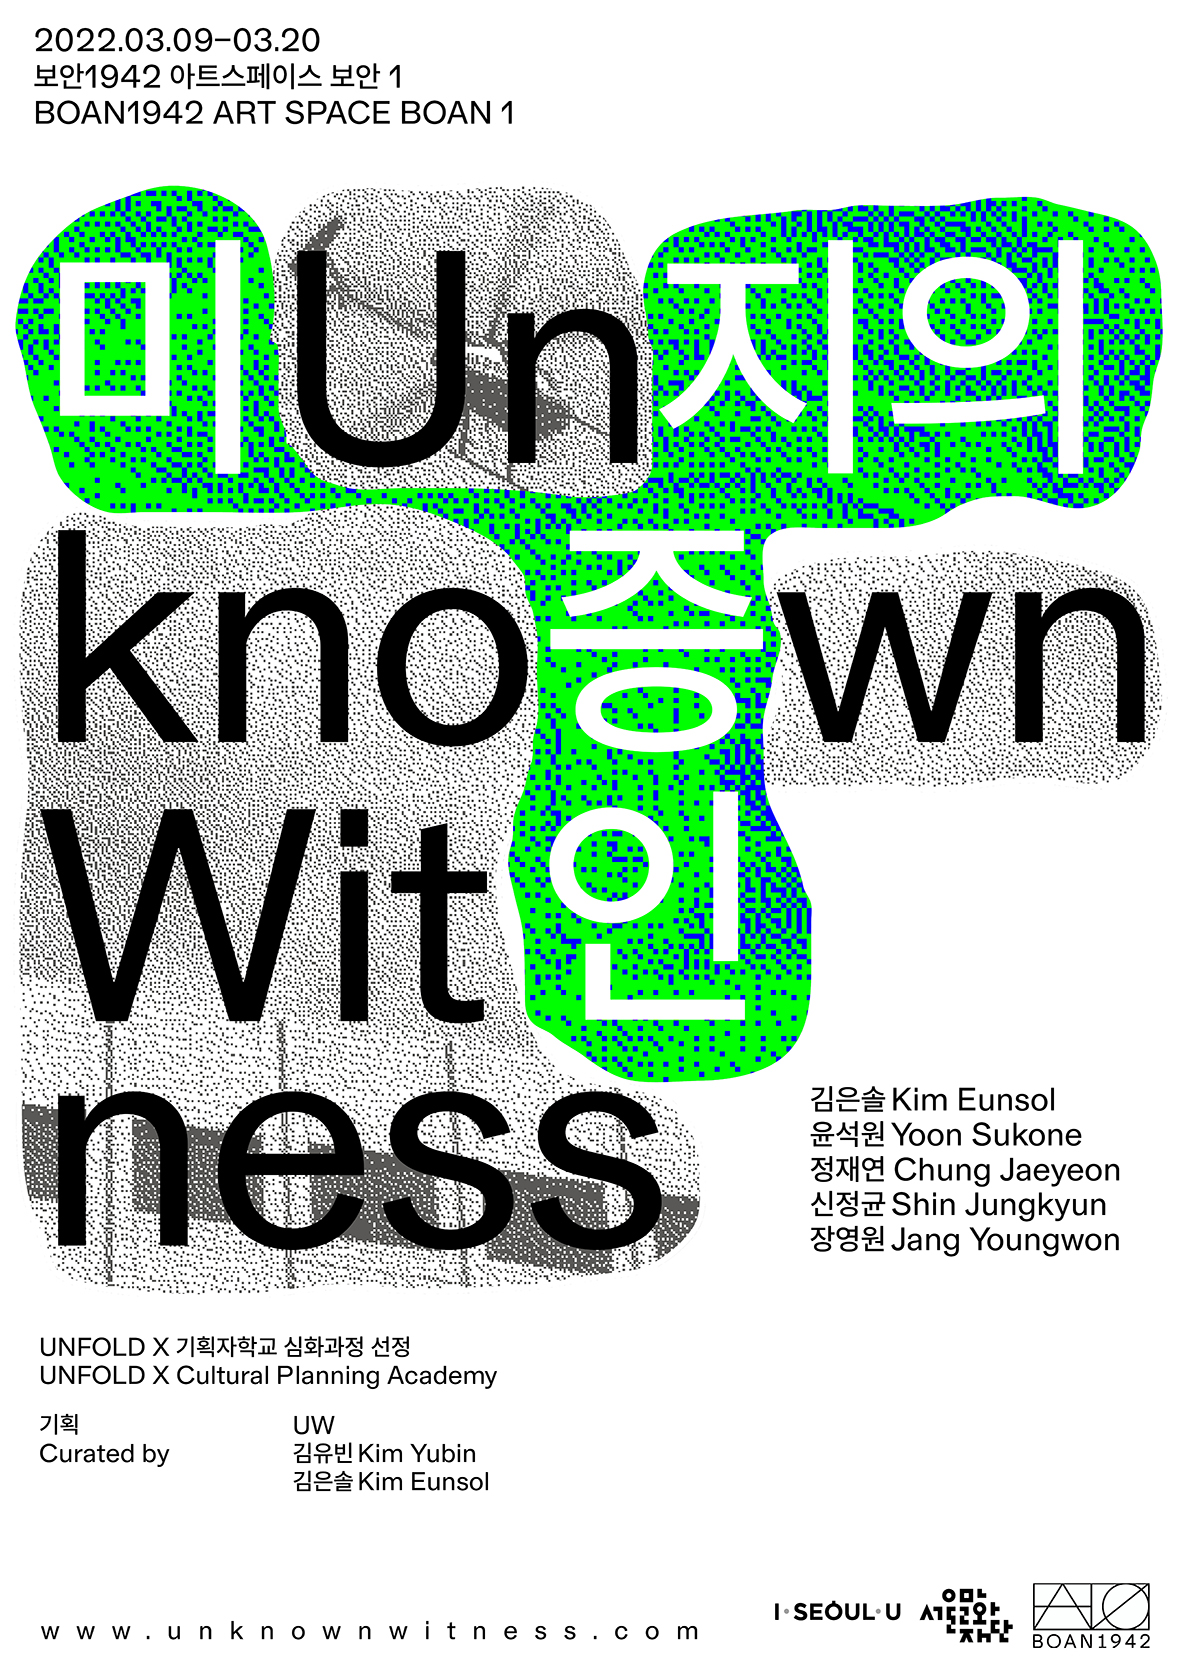 [Exhibition]Unknown Witness